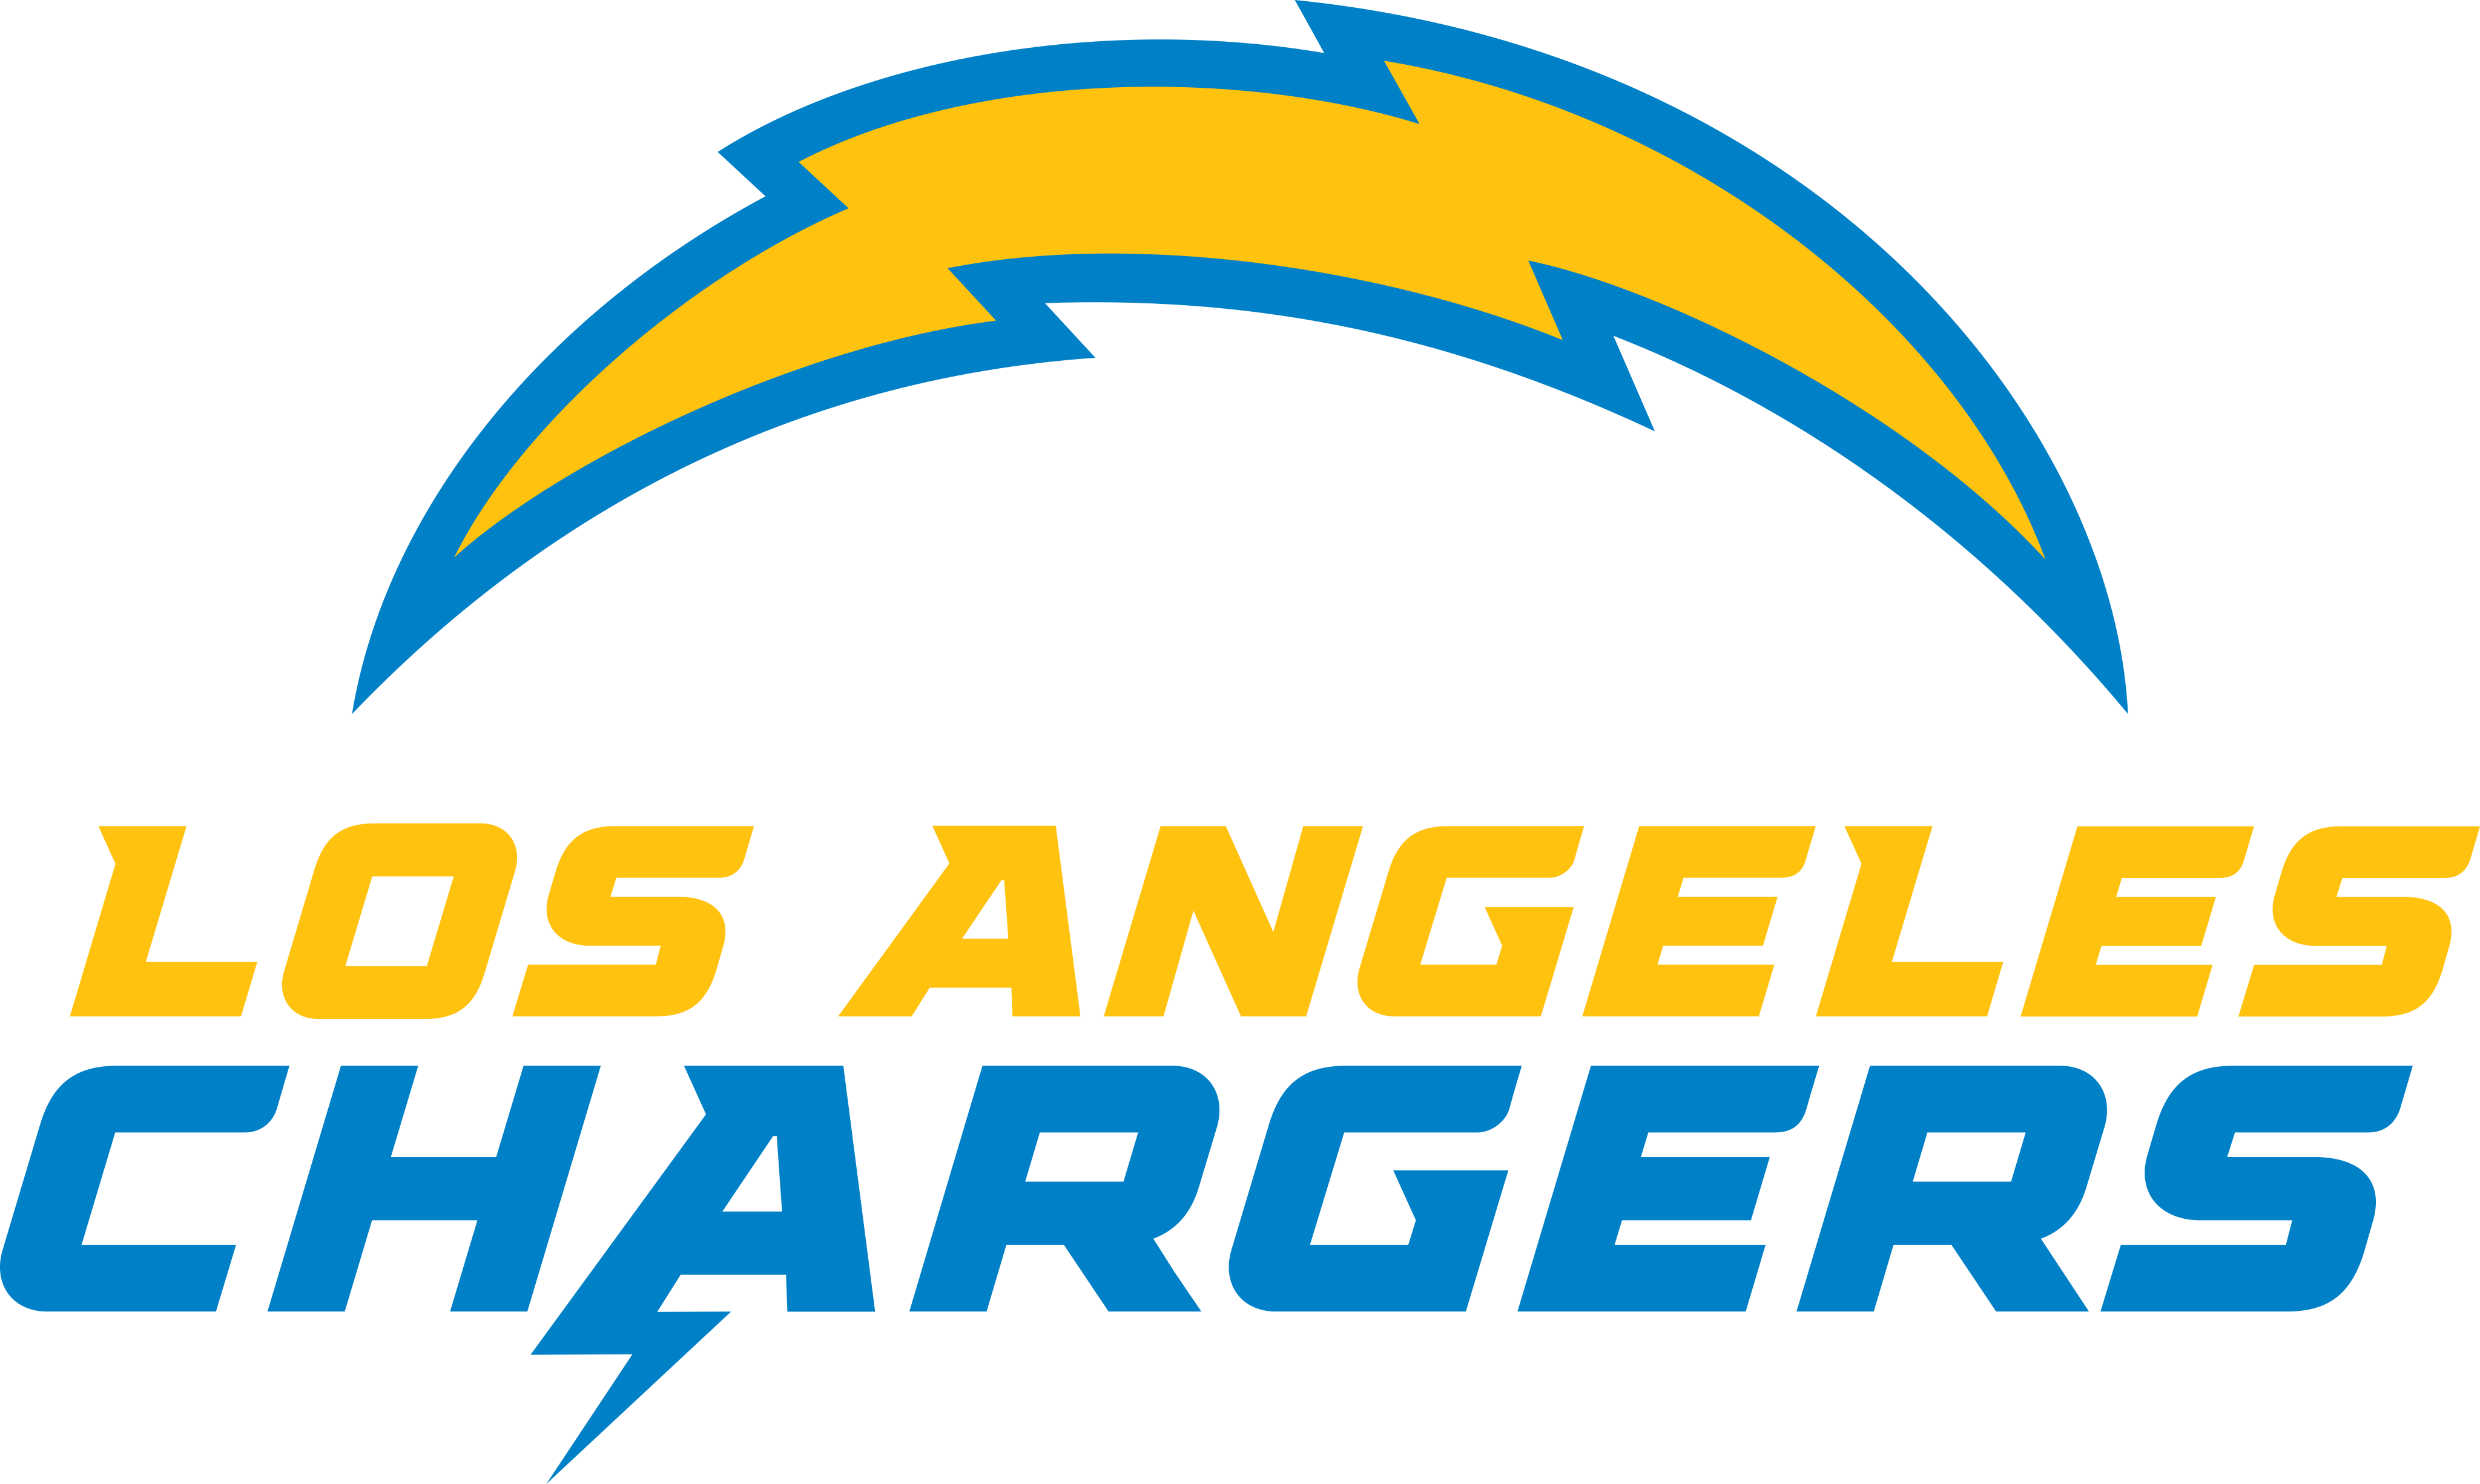 Los Angeles Chargers Logo.